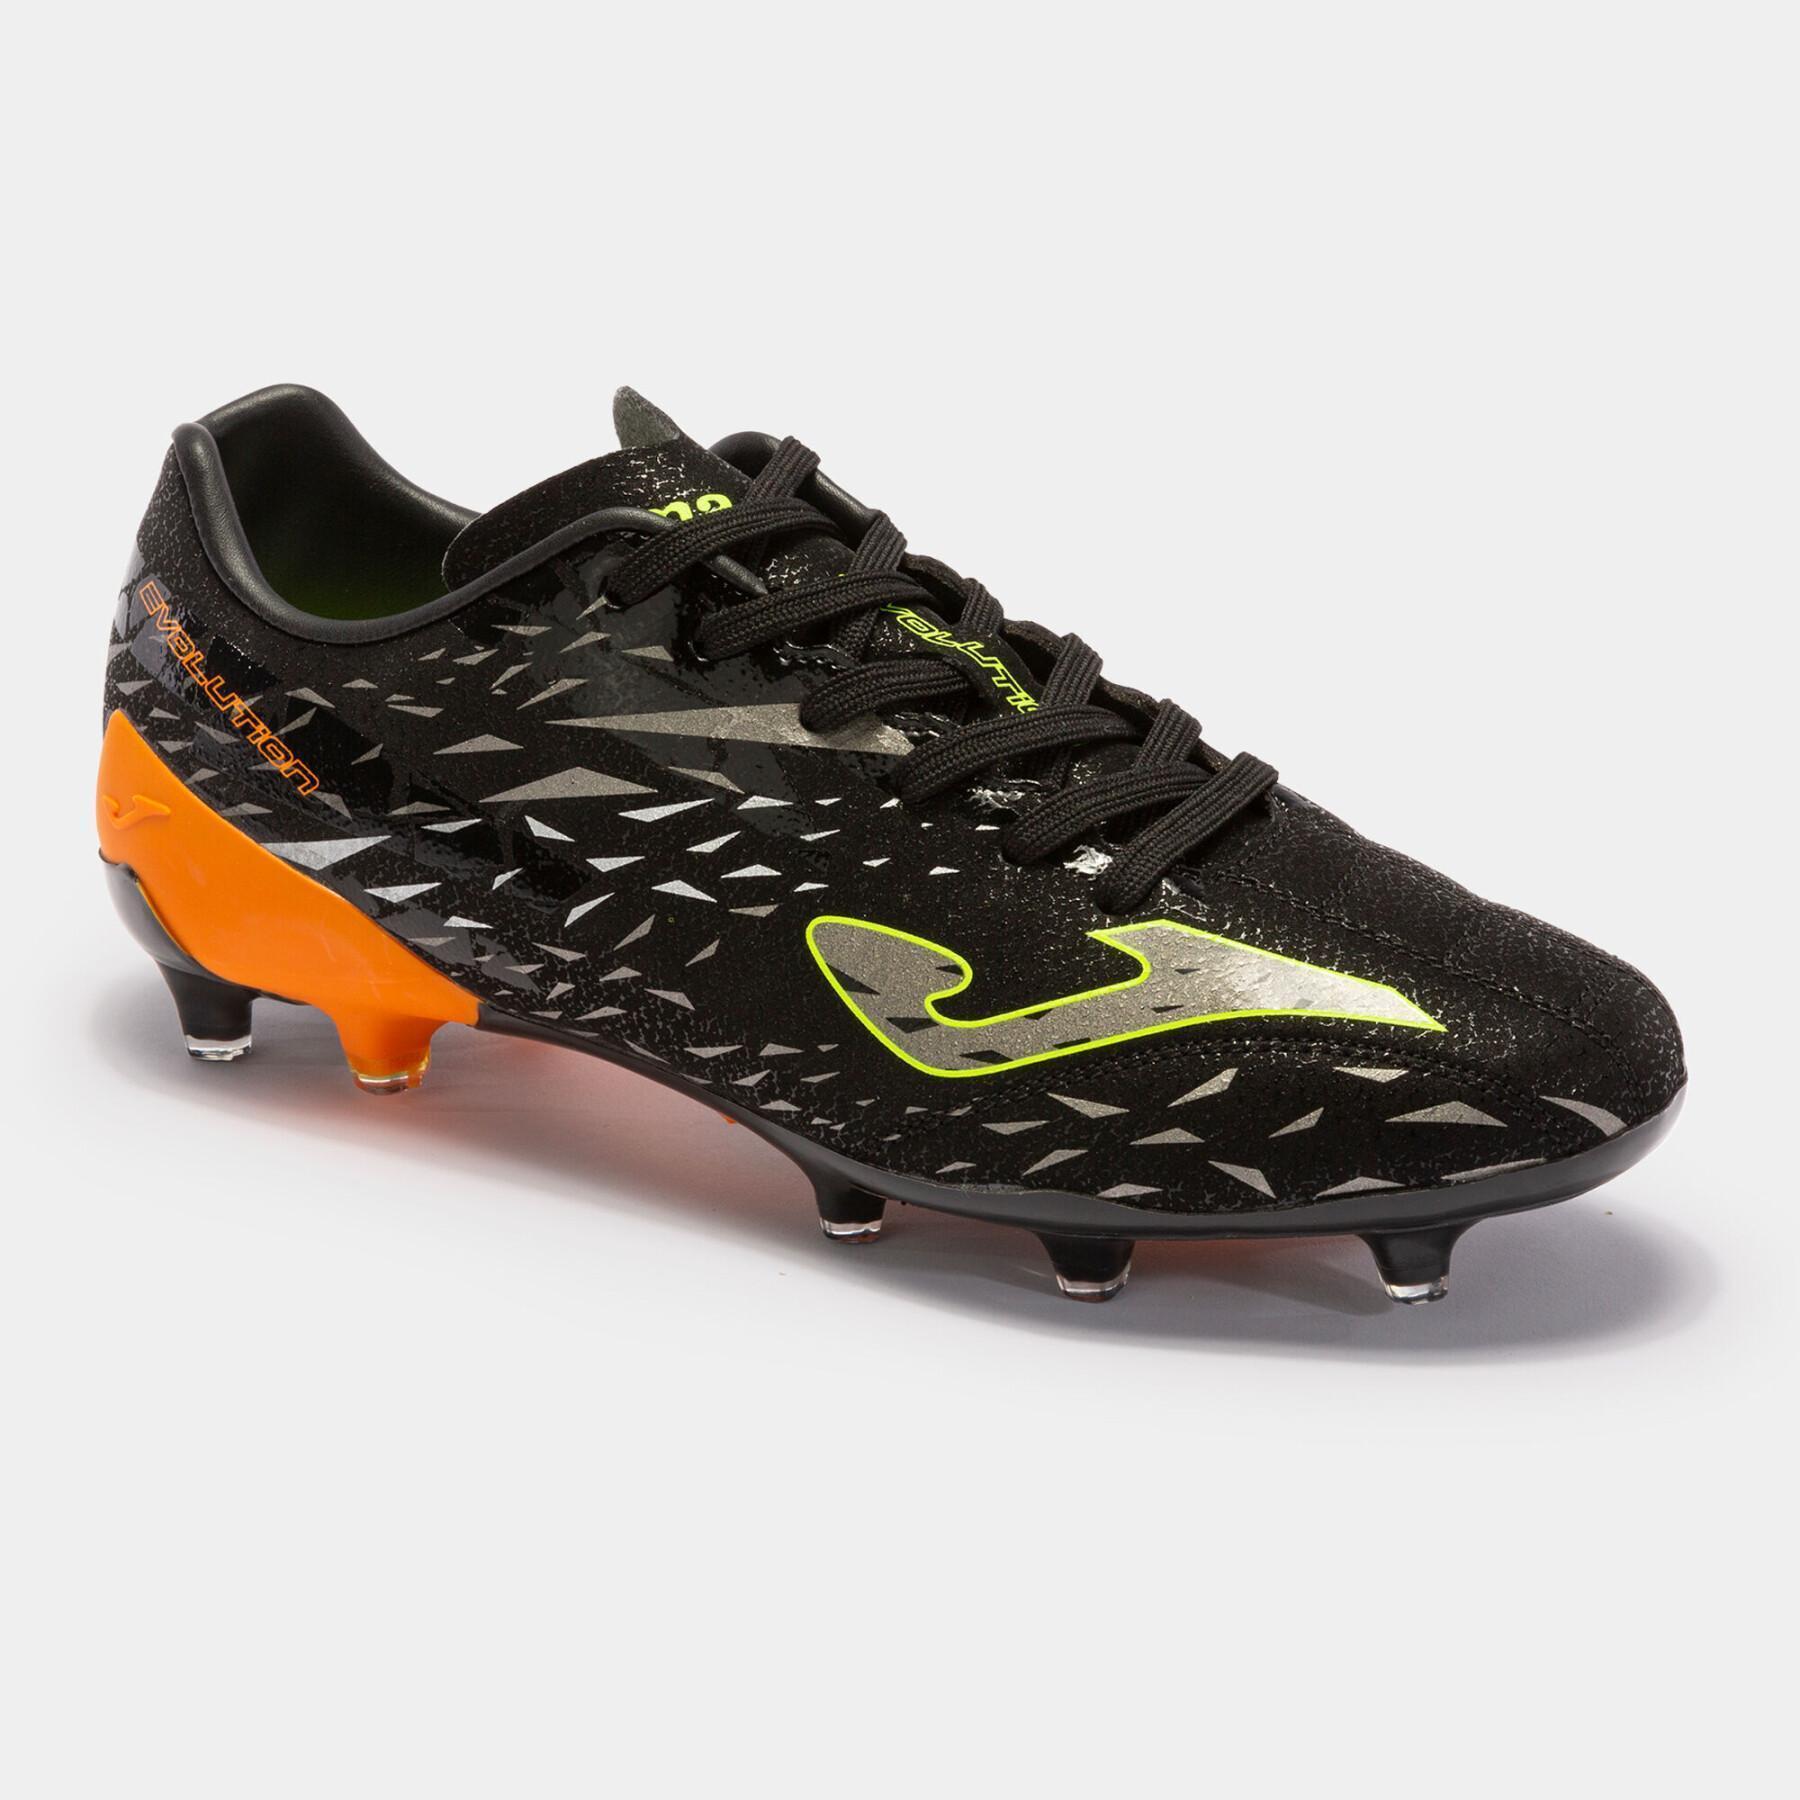 Soccer shoes Joma Evolution Cup 2301 FG